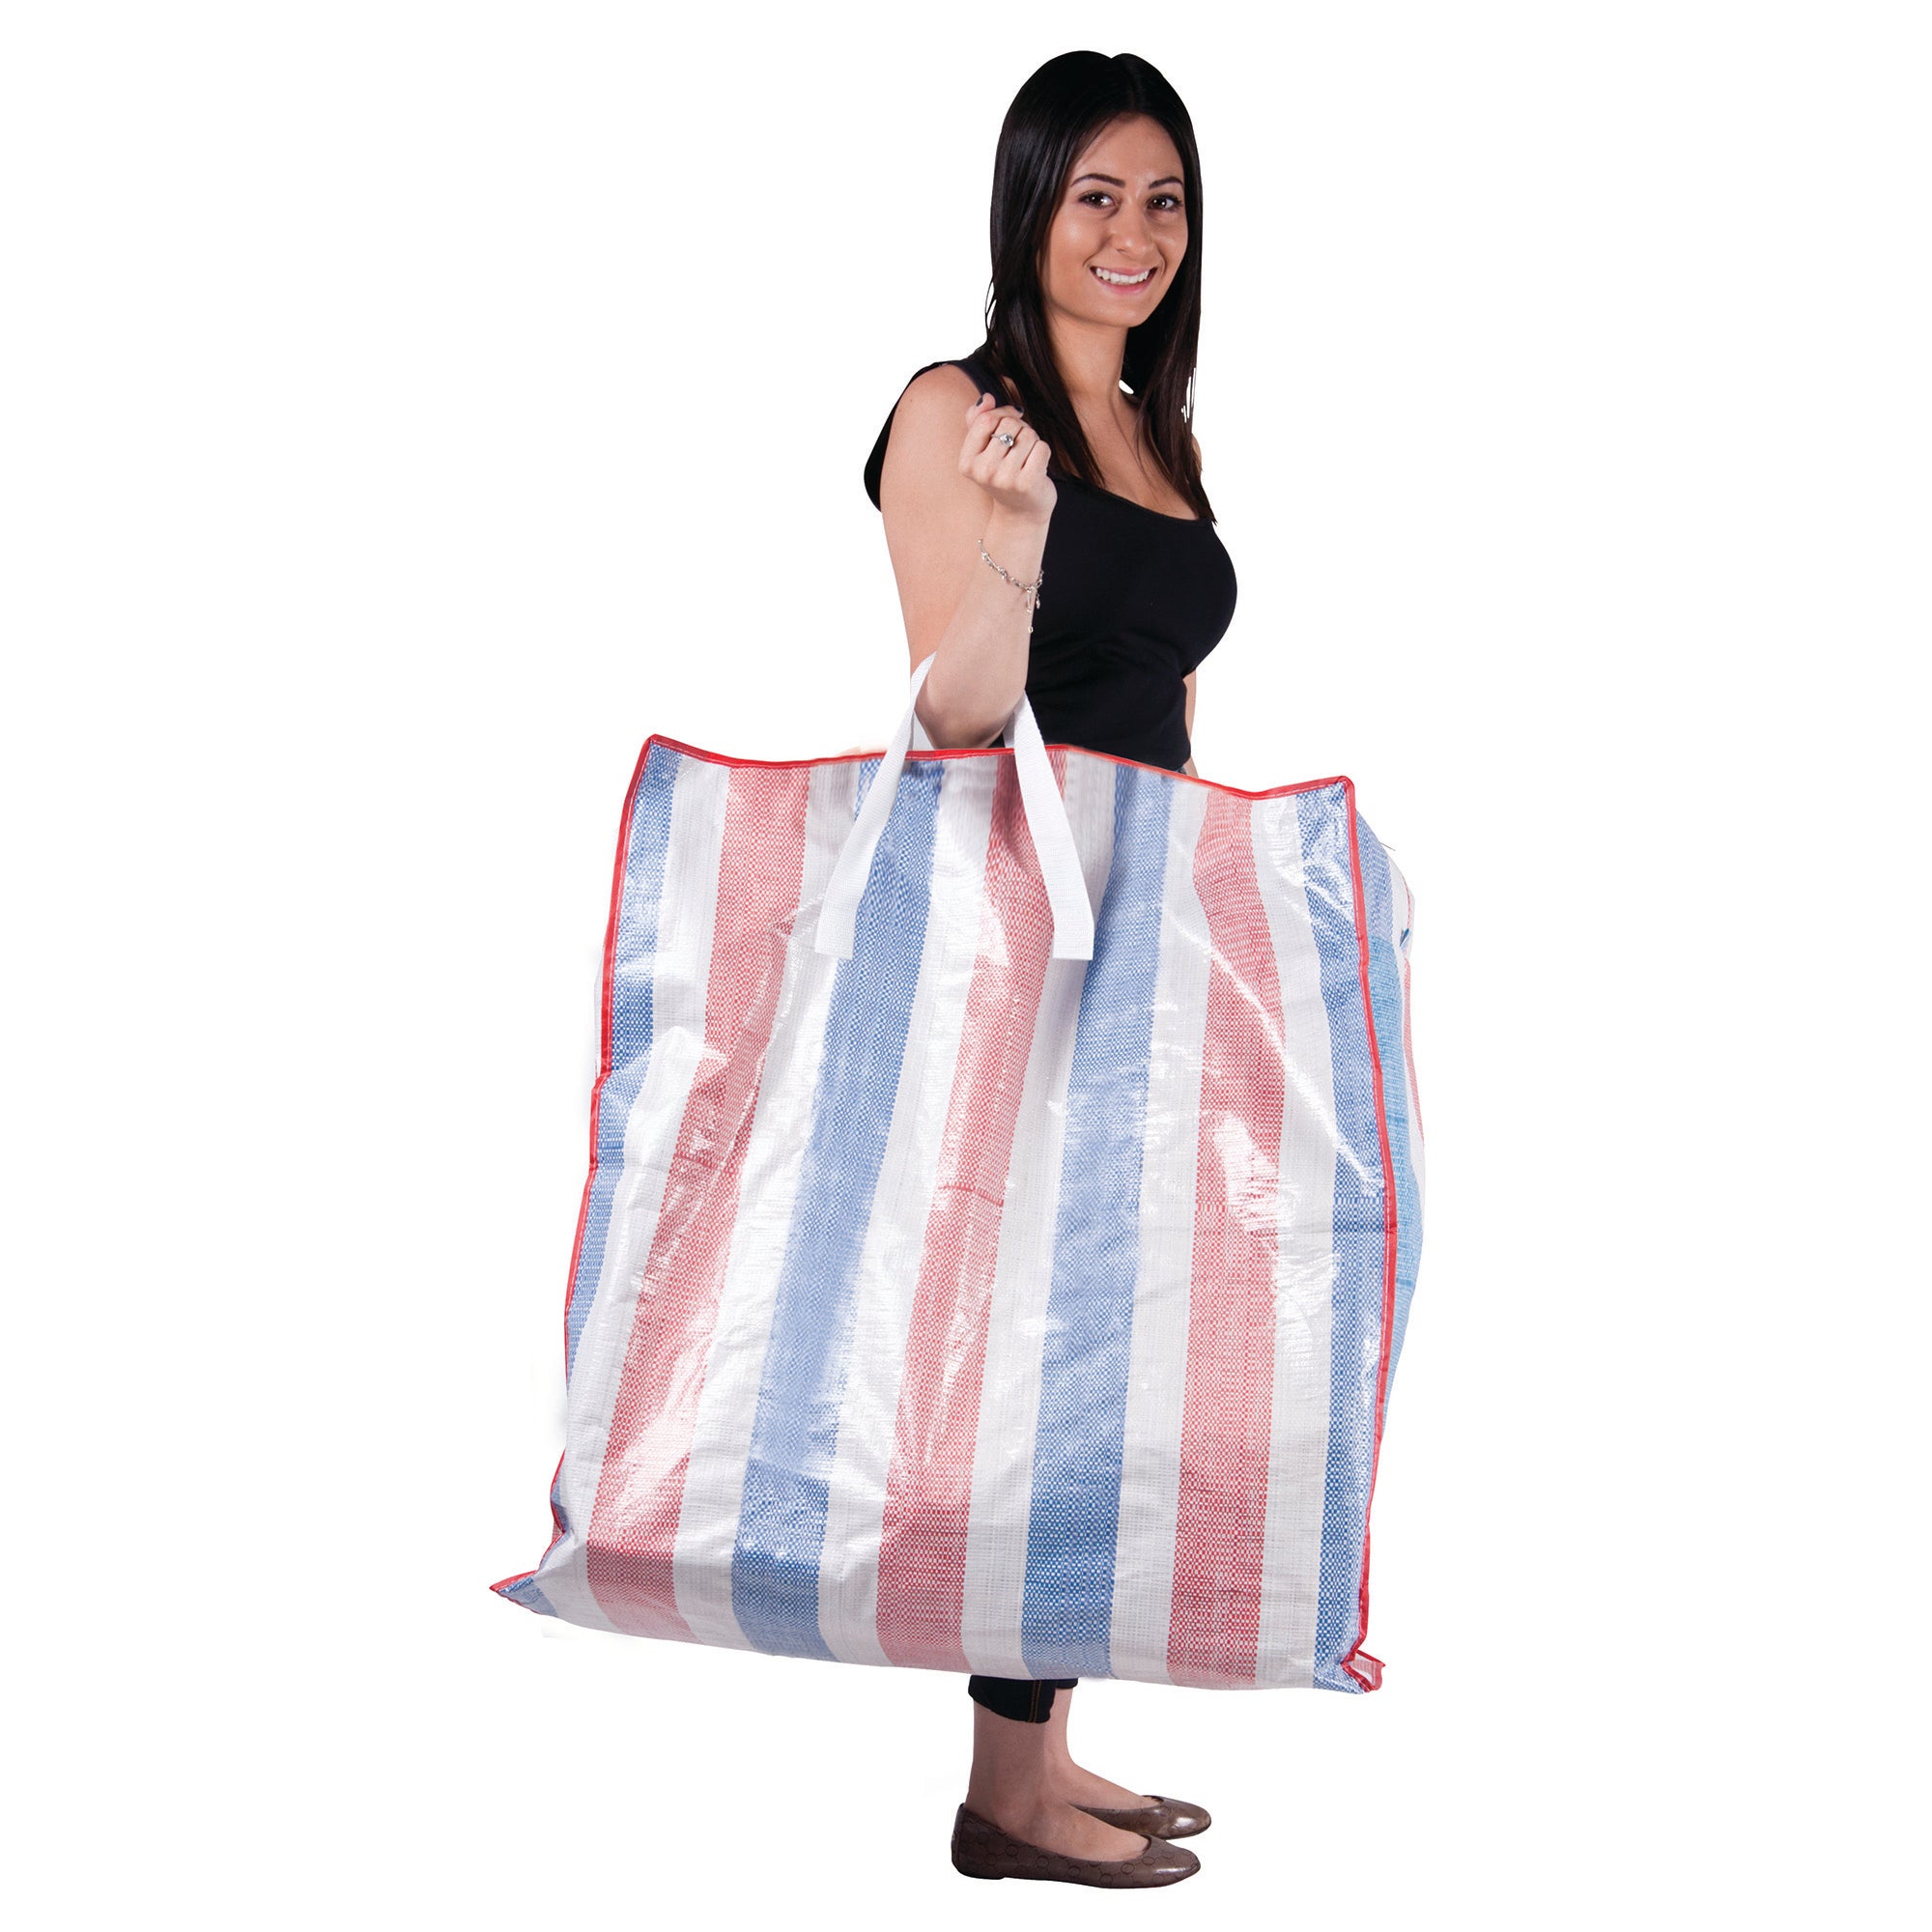 Red White Blue Bags